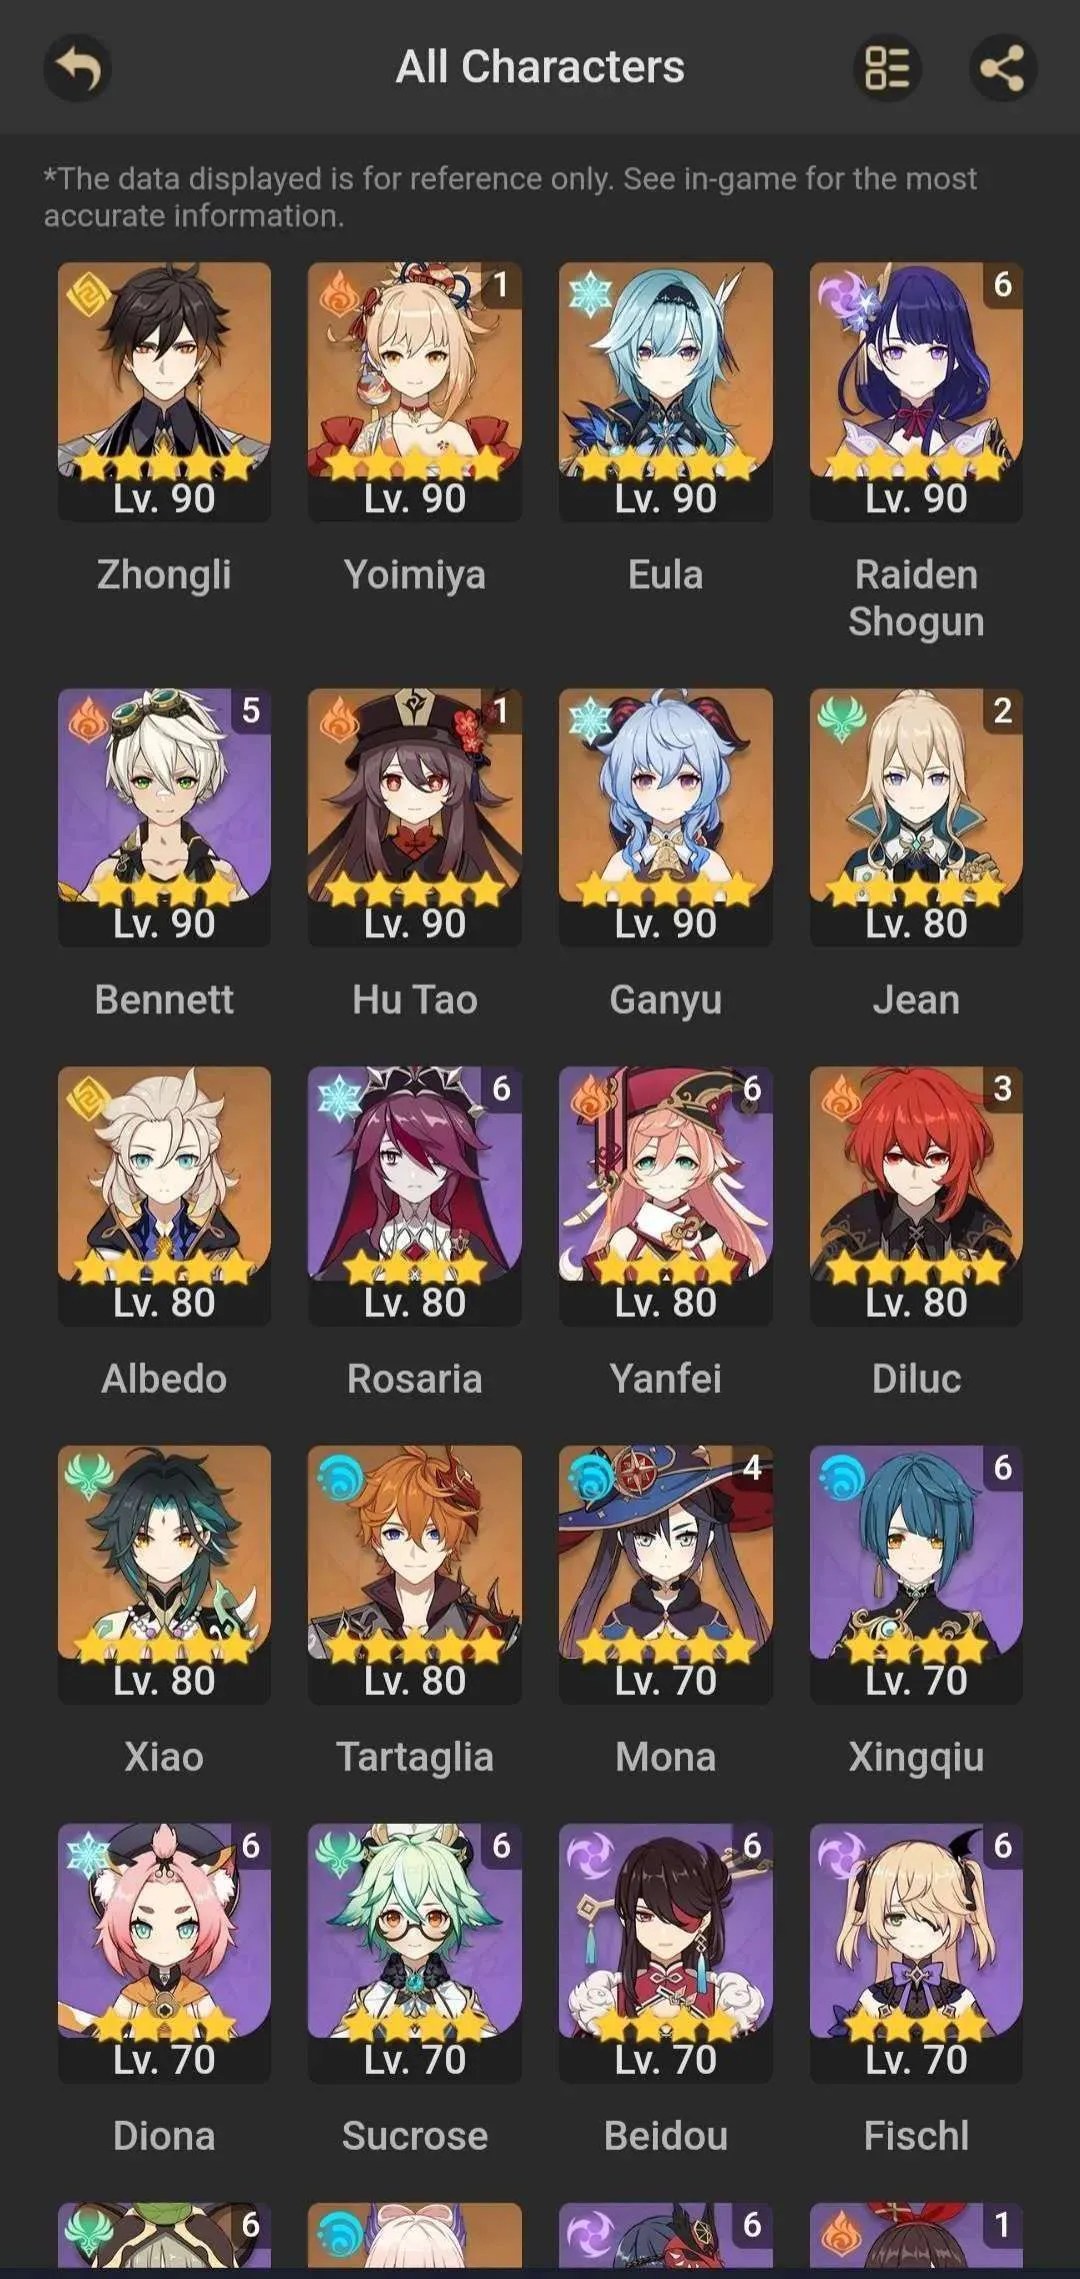 Are Genshin Impact Players Rigging The Game Awards for Free Primogems? -  QooApp News